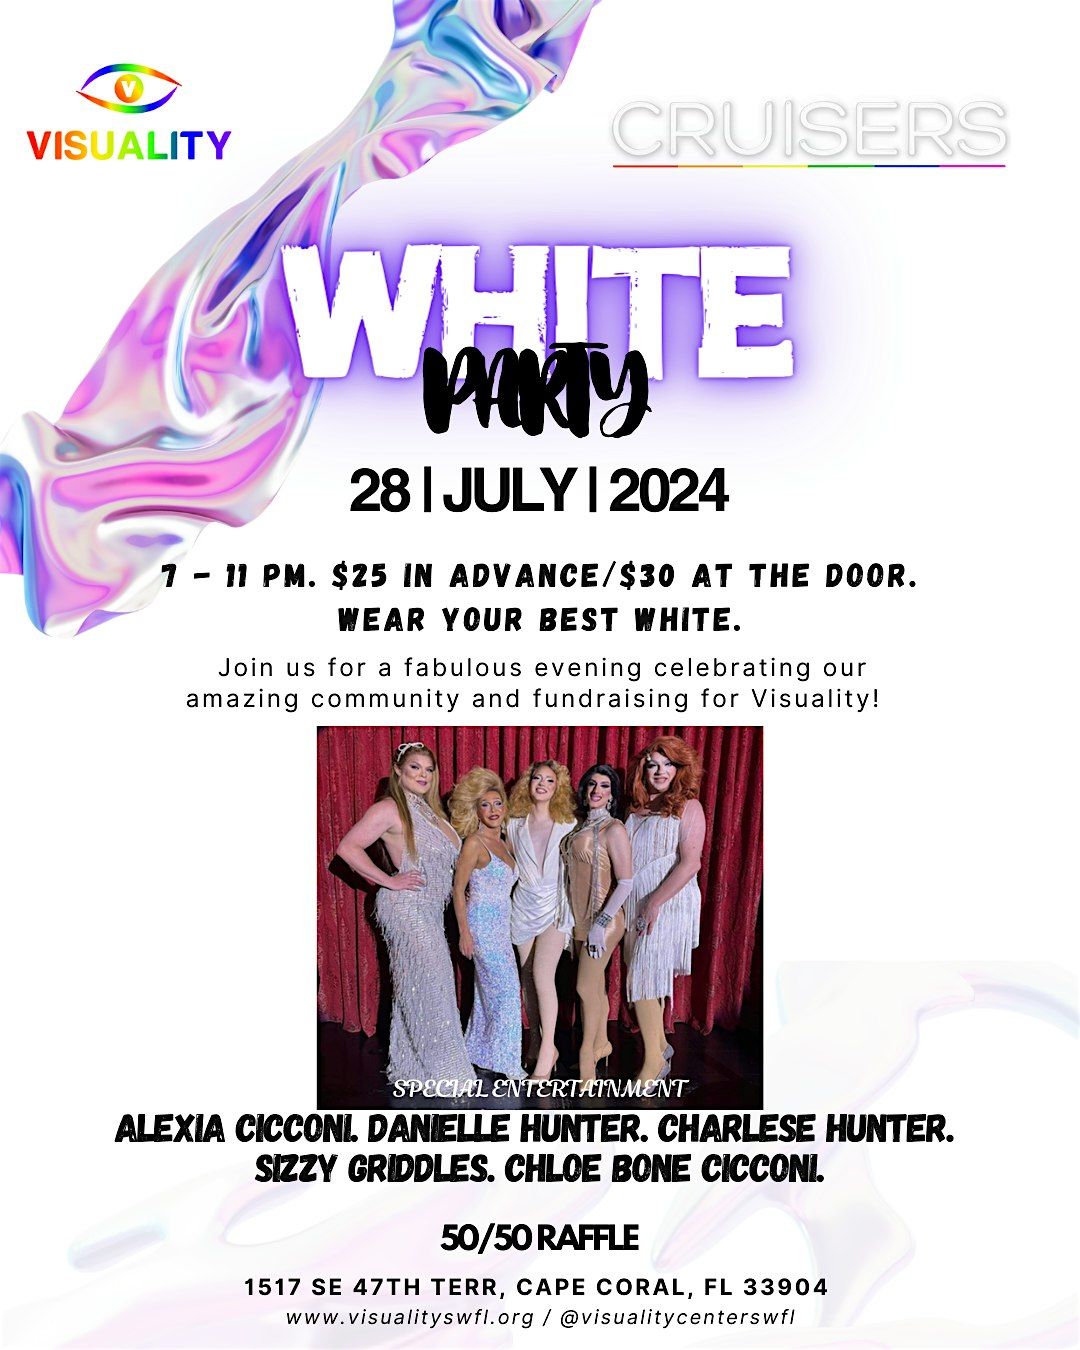 Visuality's White Party